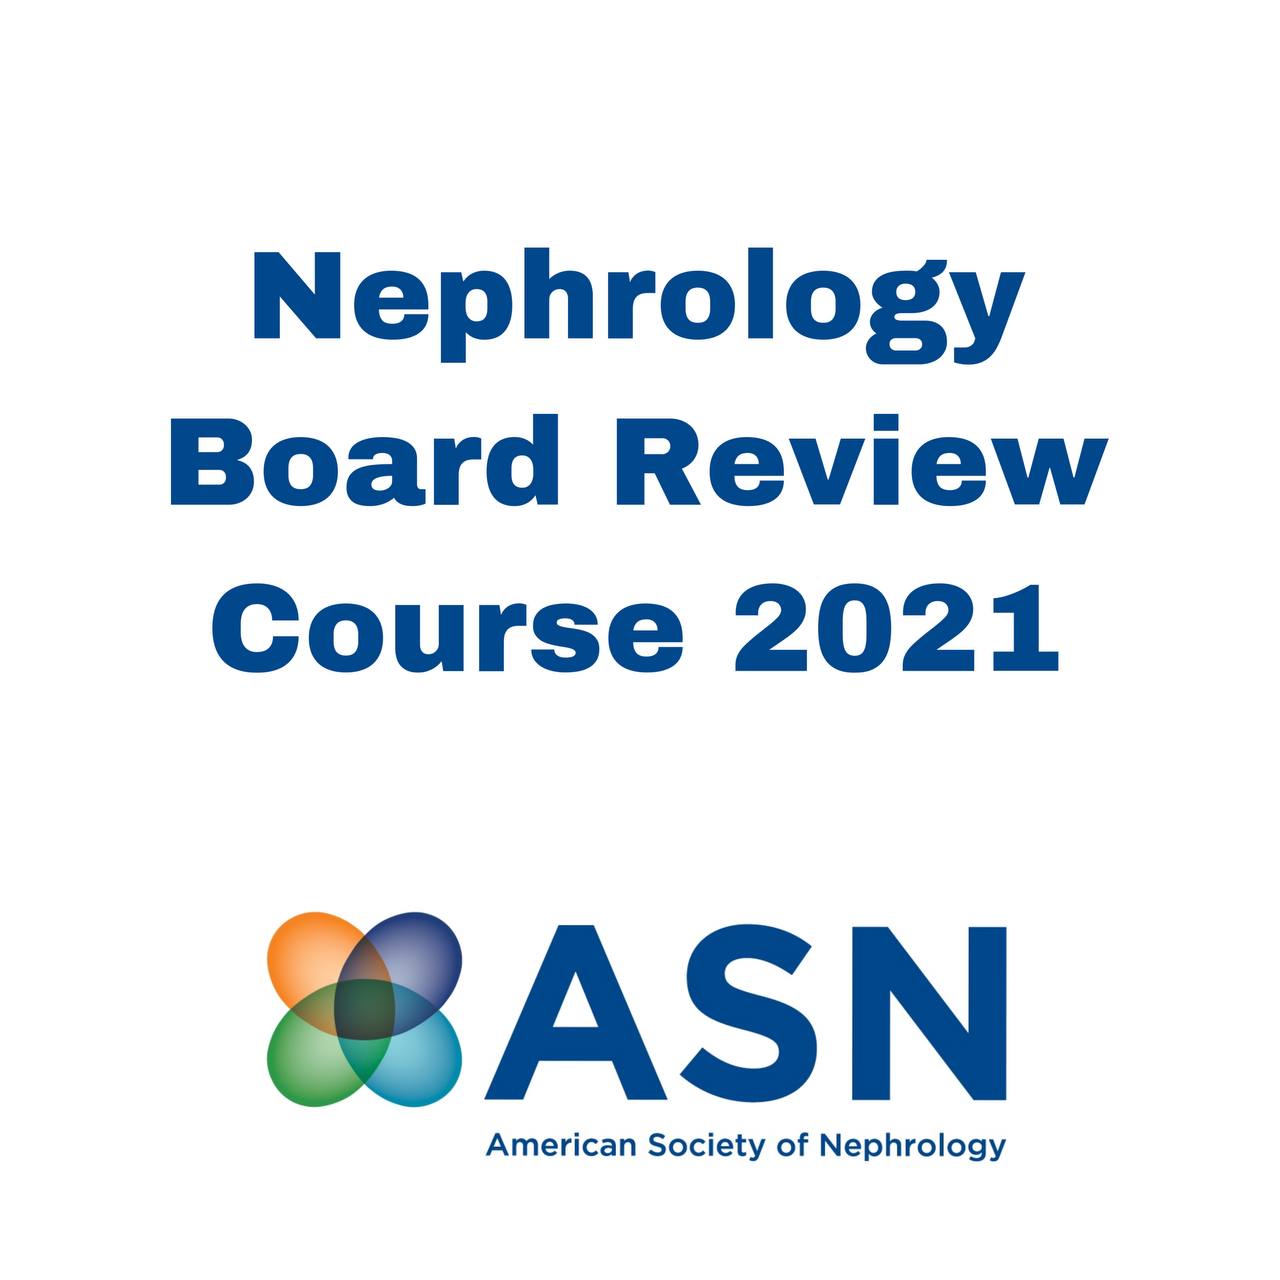 ASN NEPHROLOGY BOARD REVIEW COURSE 2021